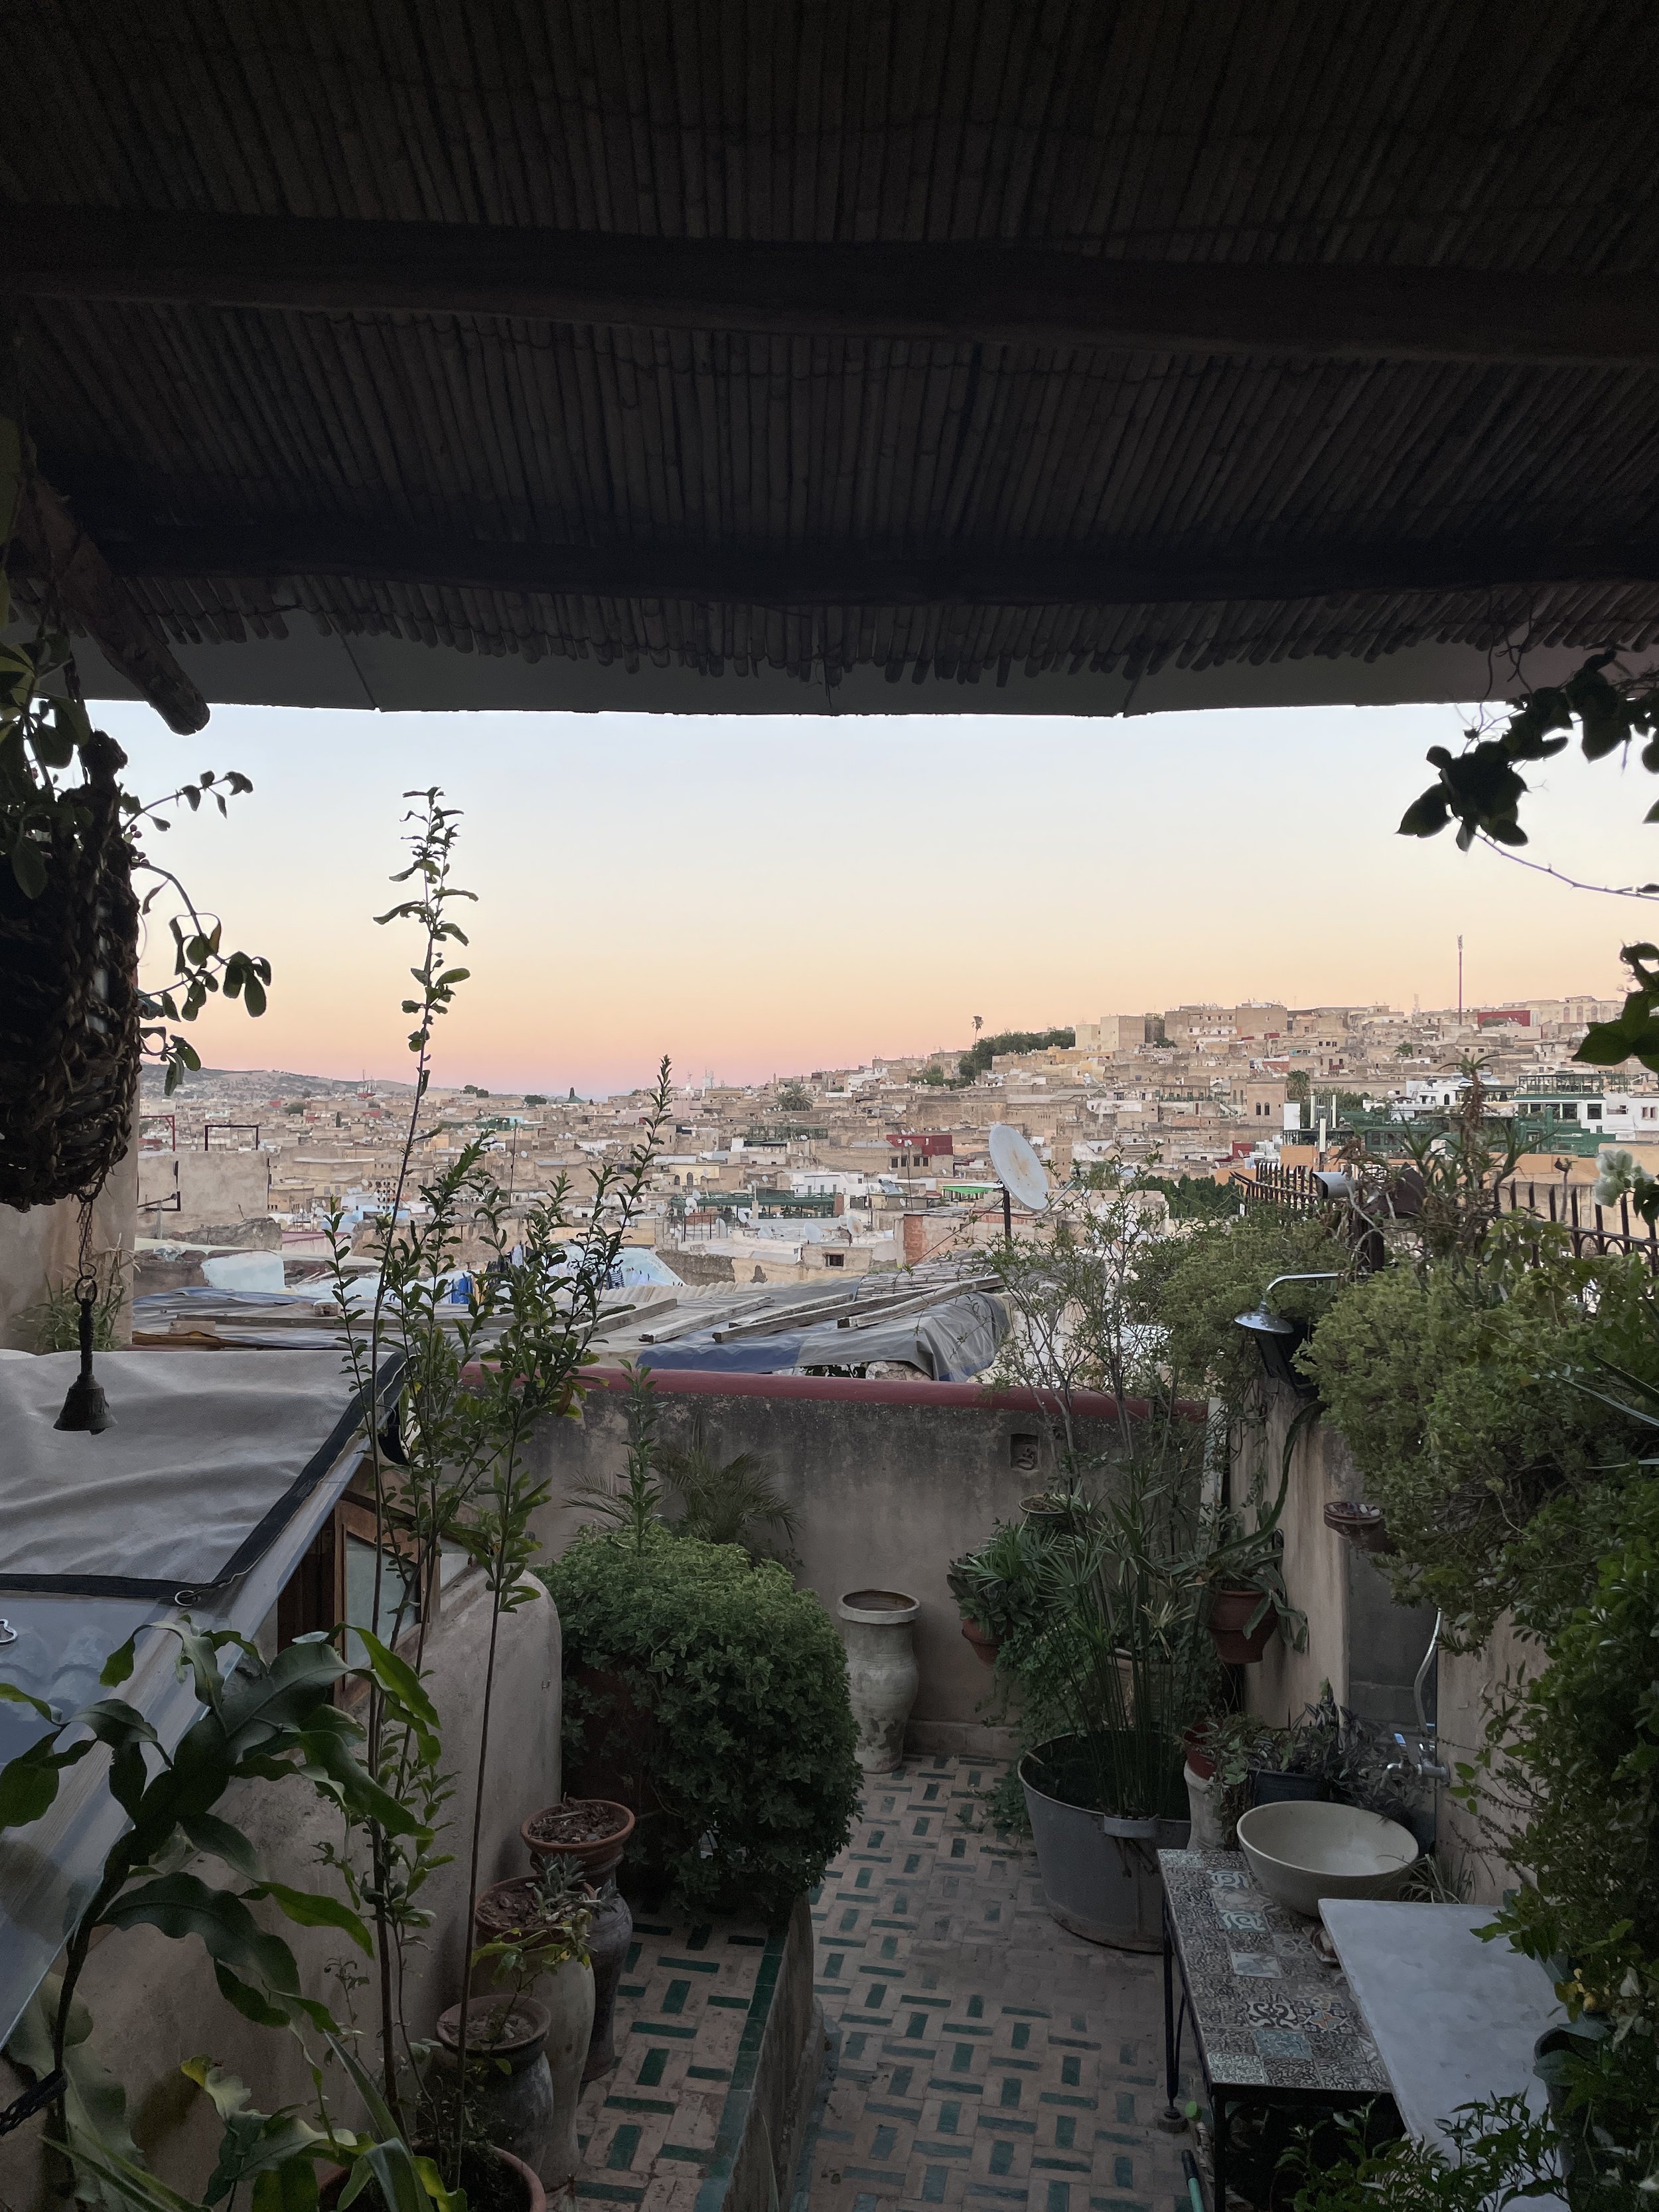  The beginning of a sunset from the terrace of an opulent riad in Fez. My cohort stayed here all together for one night before heading off to the Sahara Desert the next morning. 